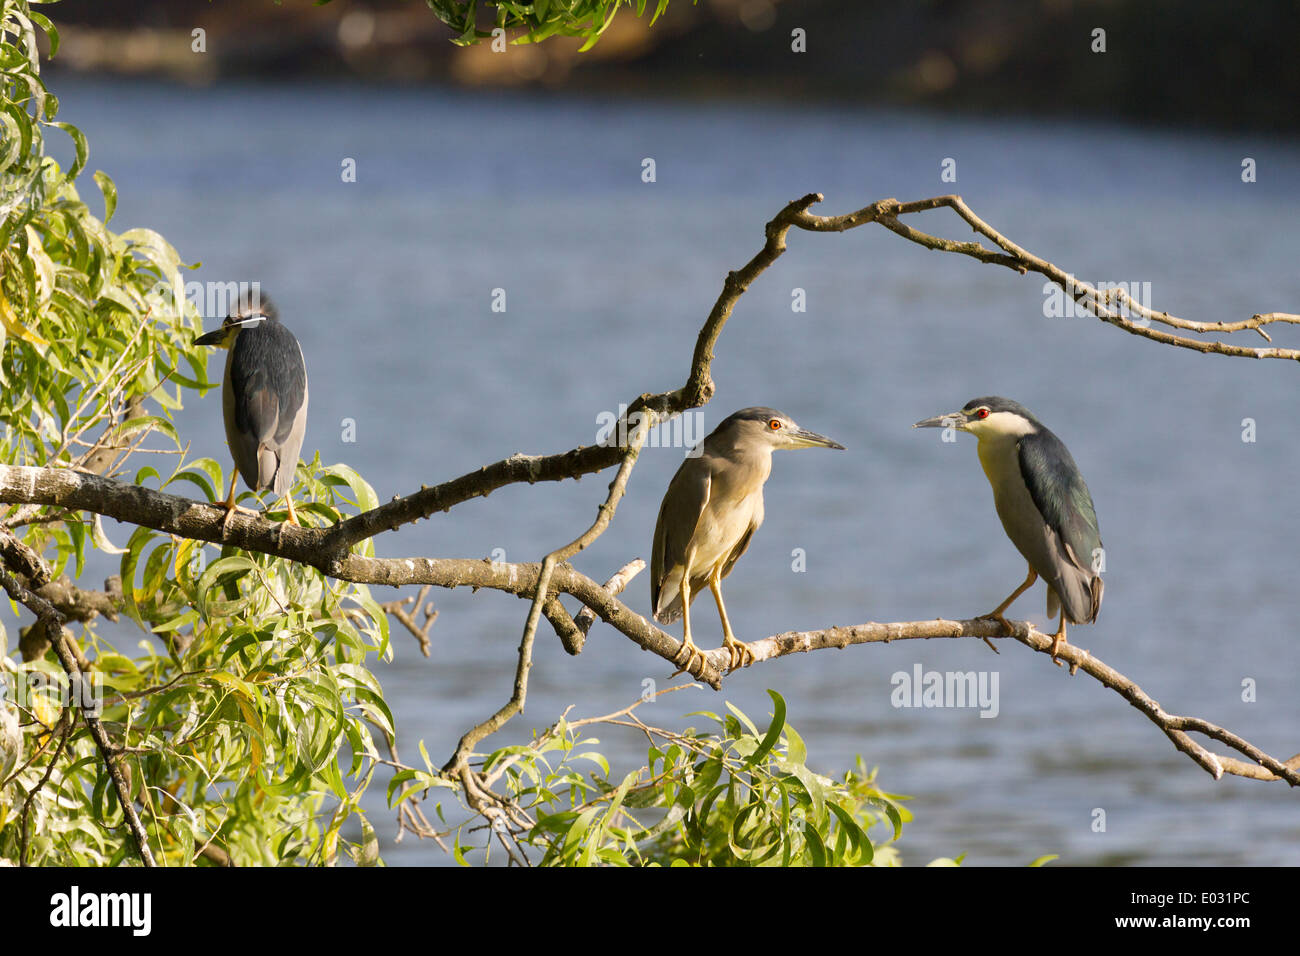 Crowned Herons perched on a tree by Lake Kandy, Sri Lanka 1 Stock Photo